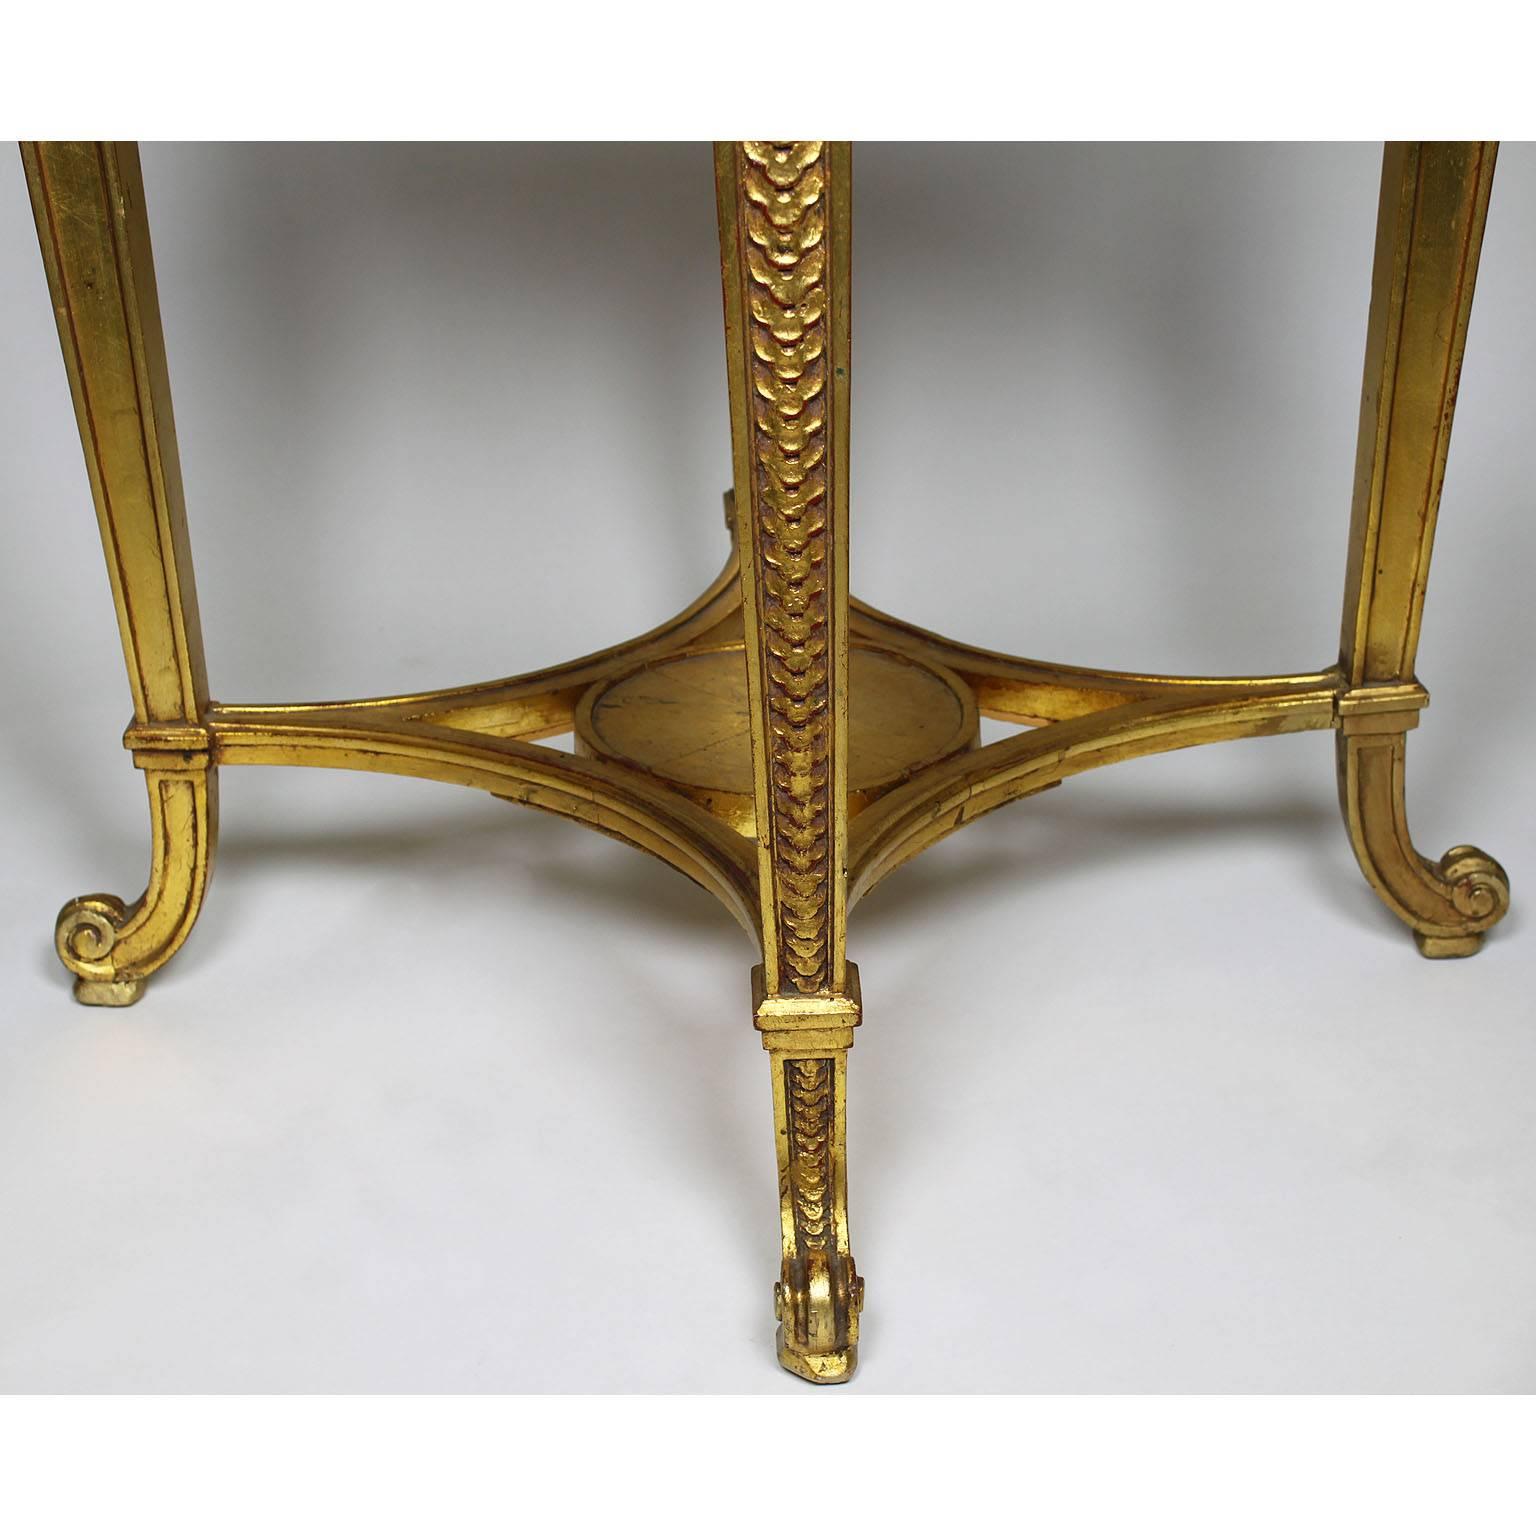 20th Century French Louis XV Style Giltwood Carved Gueridon Side Table with Marble Top For Sale